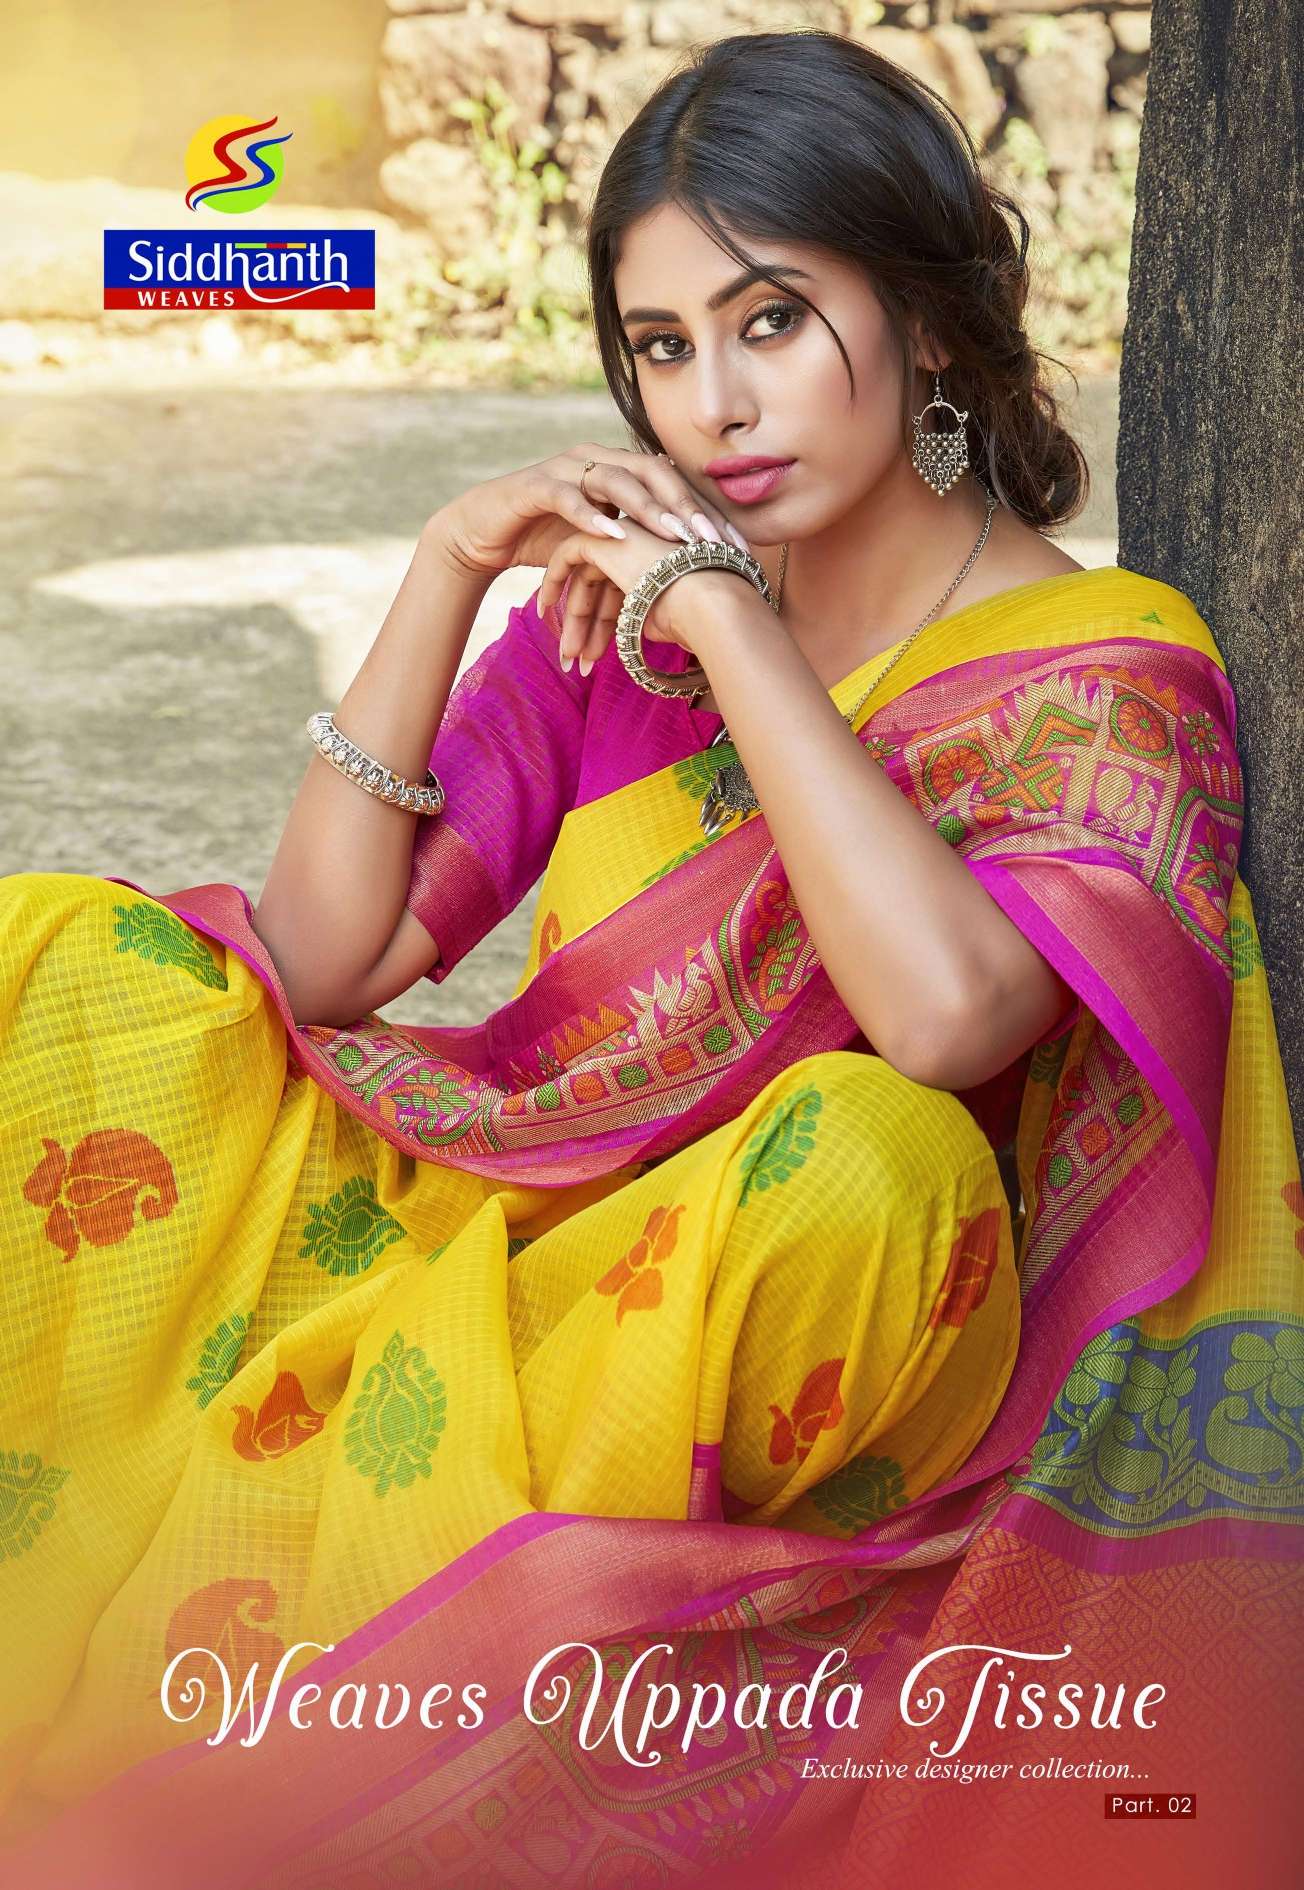 SIDDHANTH WEAVE PRESENTS WEAVE UPADA TISSUE FANCY COTTON BASE SILK SAREES CATALOG AUTHORIZED SUPPLIER IN SURAT